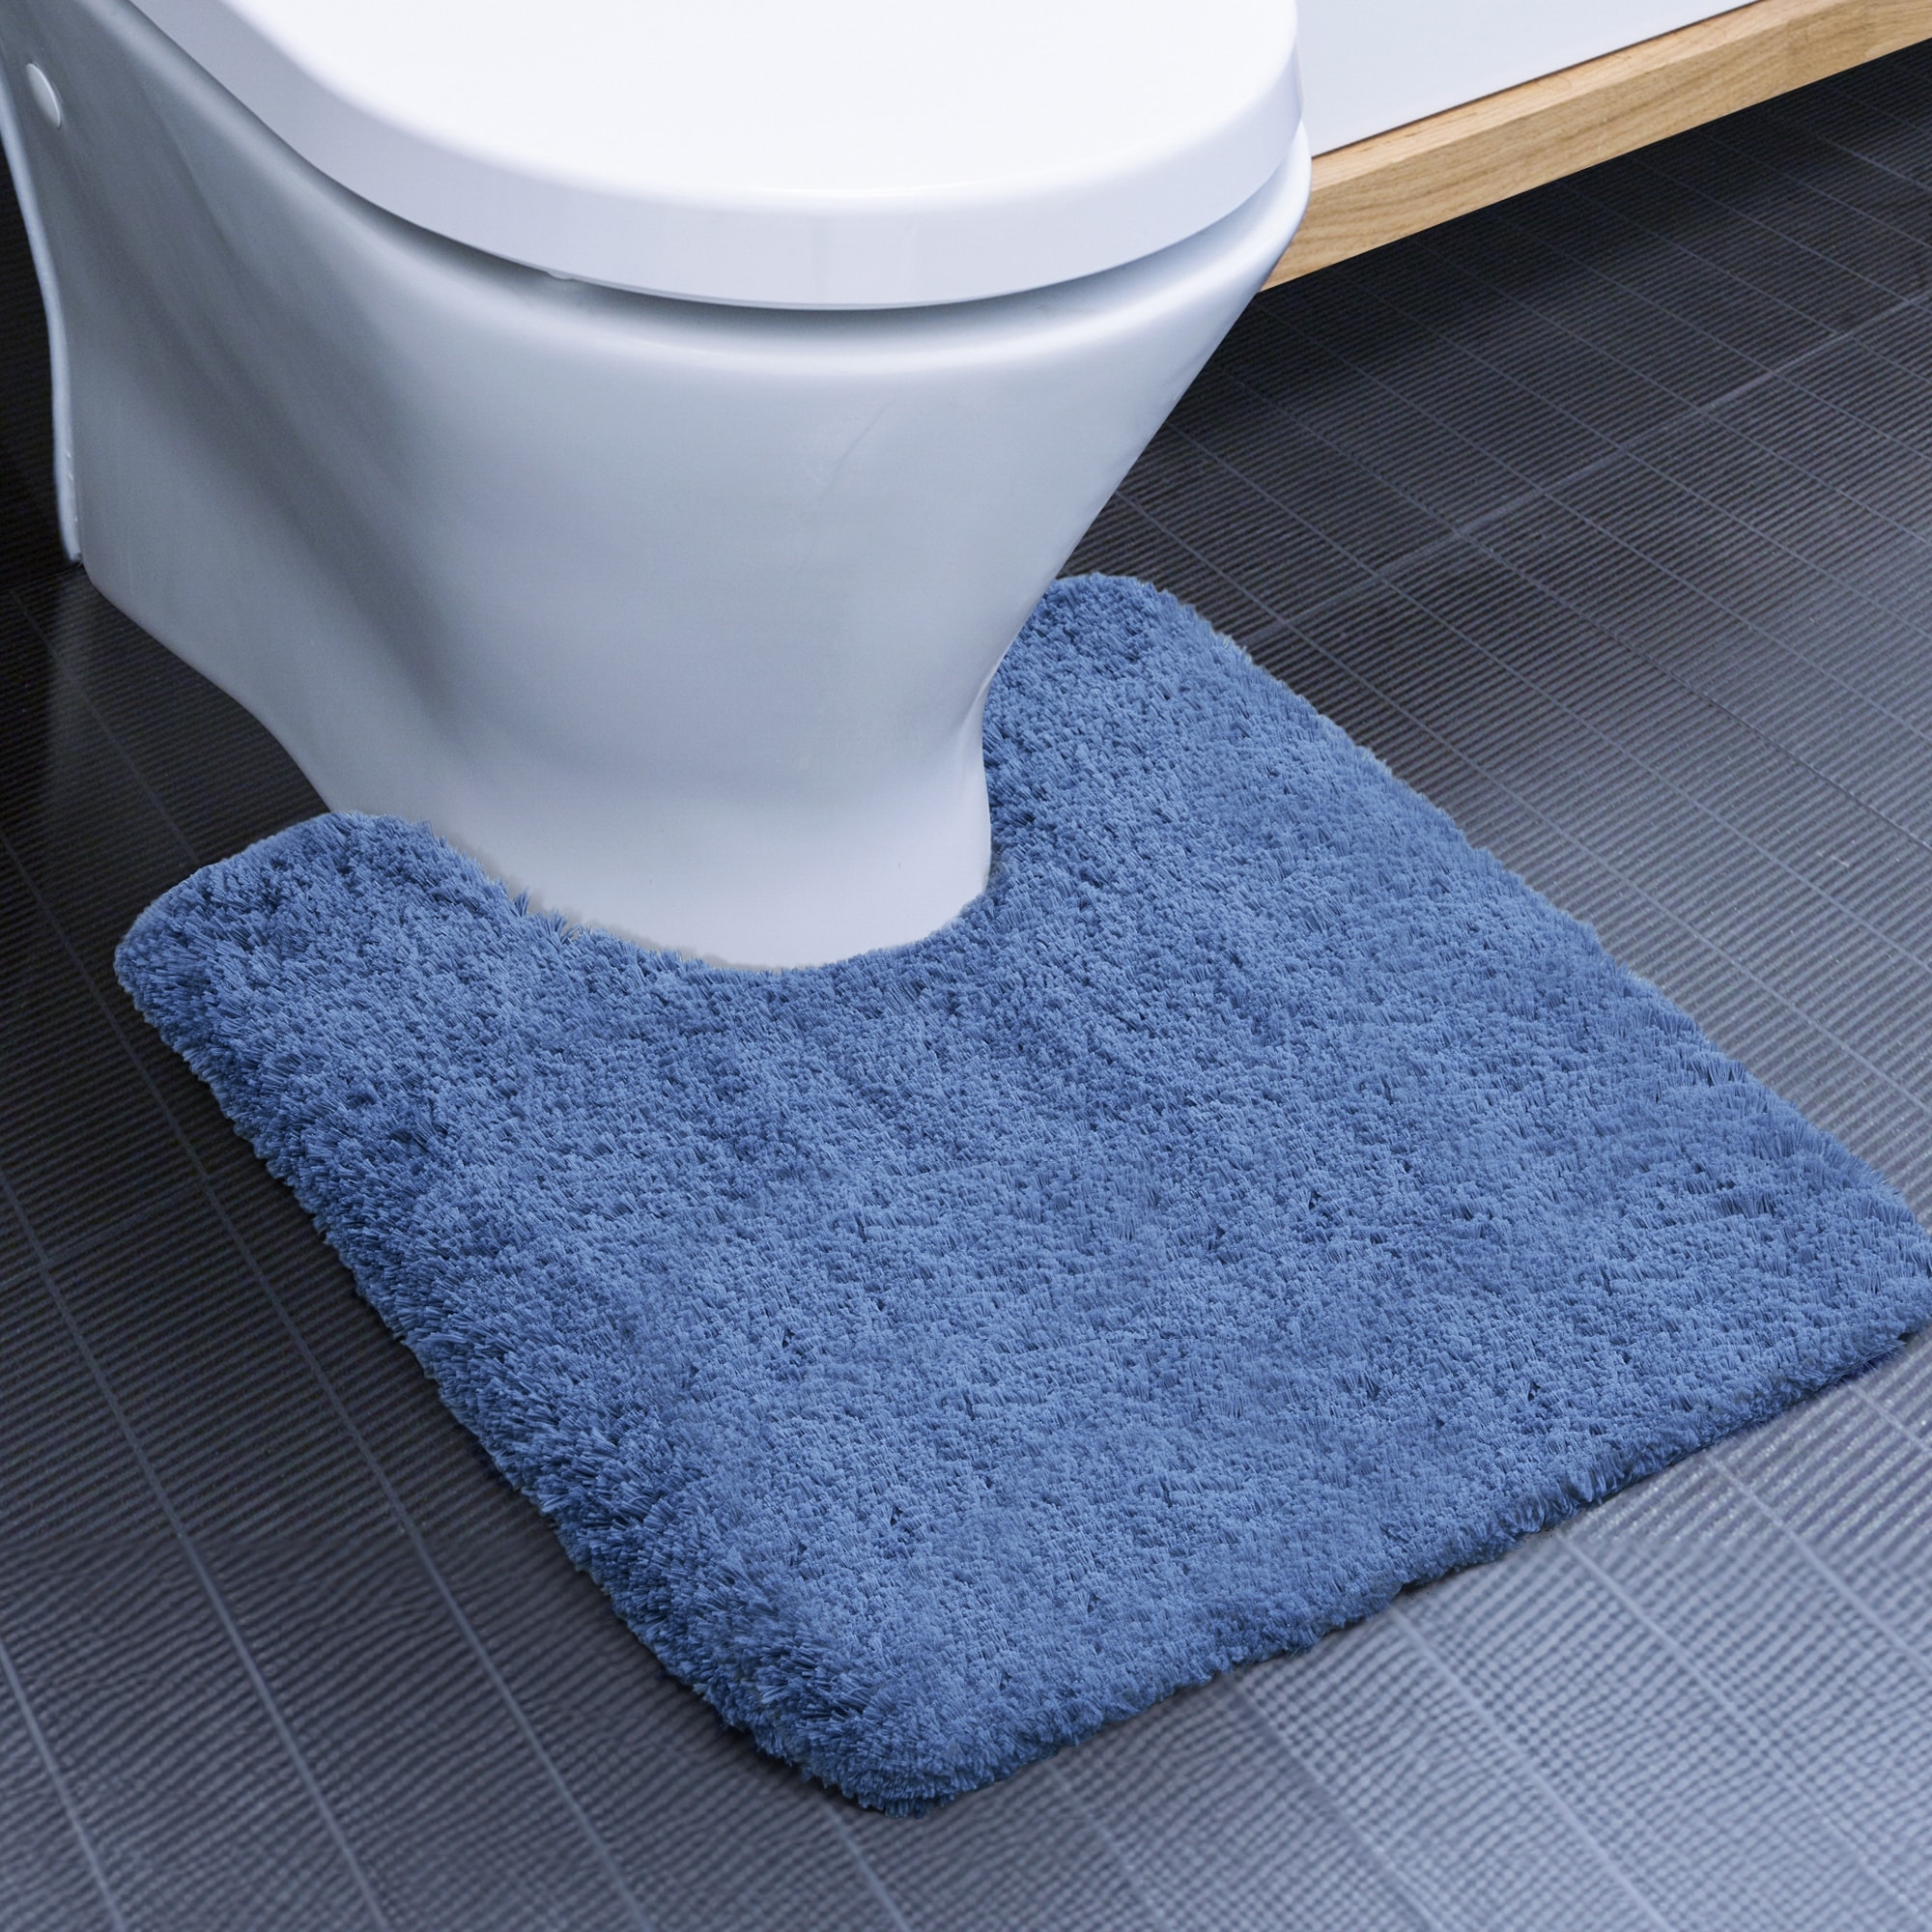 Extra Thick Bath Rugs - On Sale - Bed Bath & Beyond - 38379791